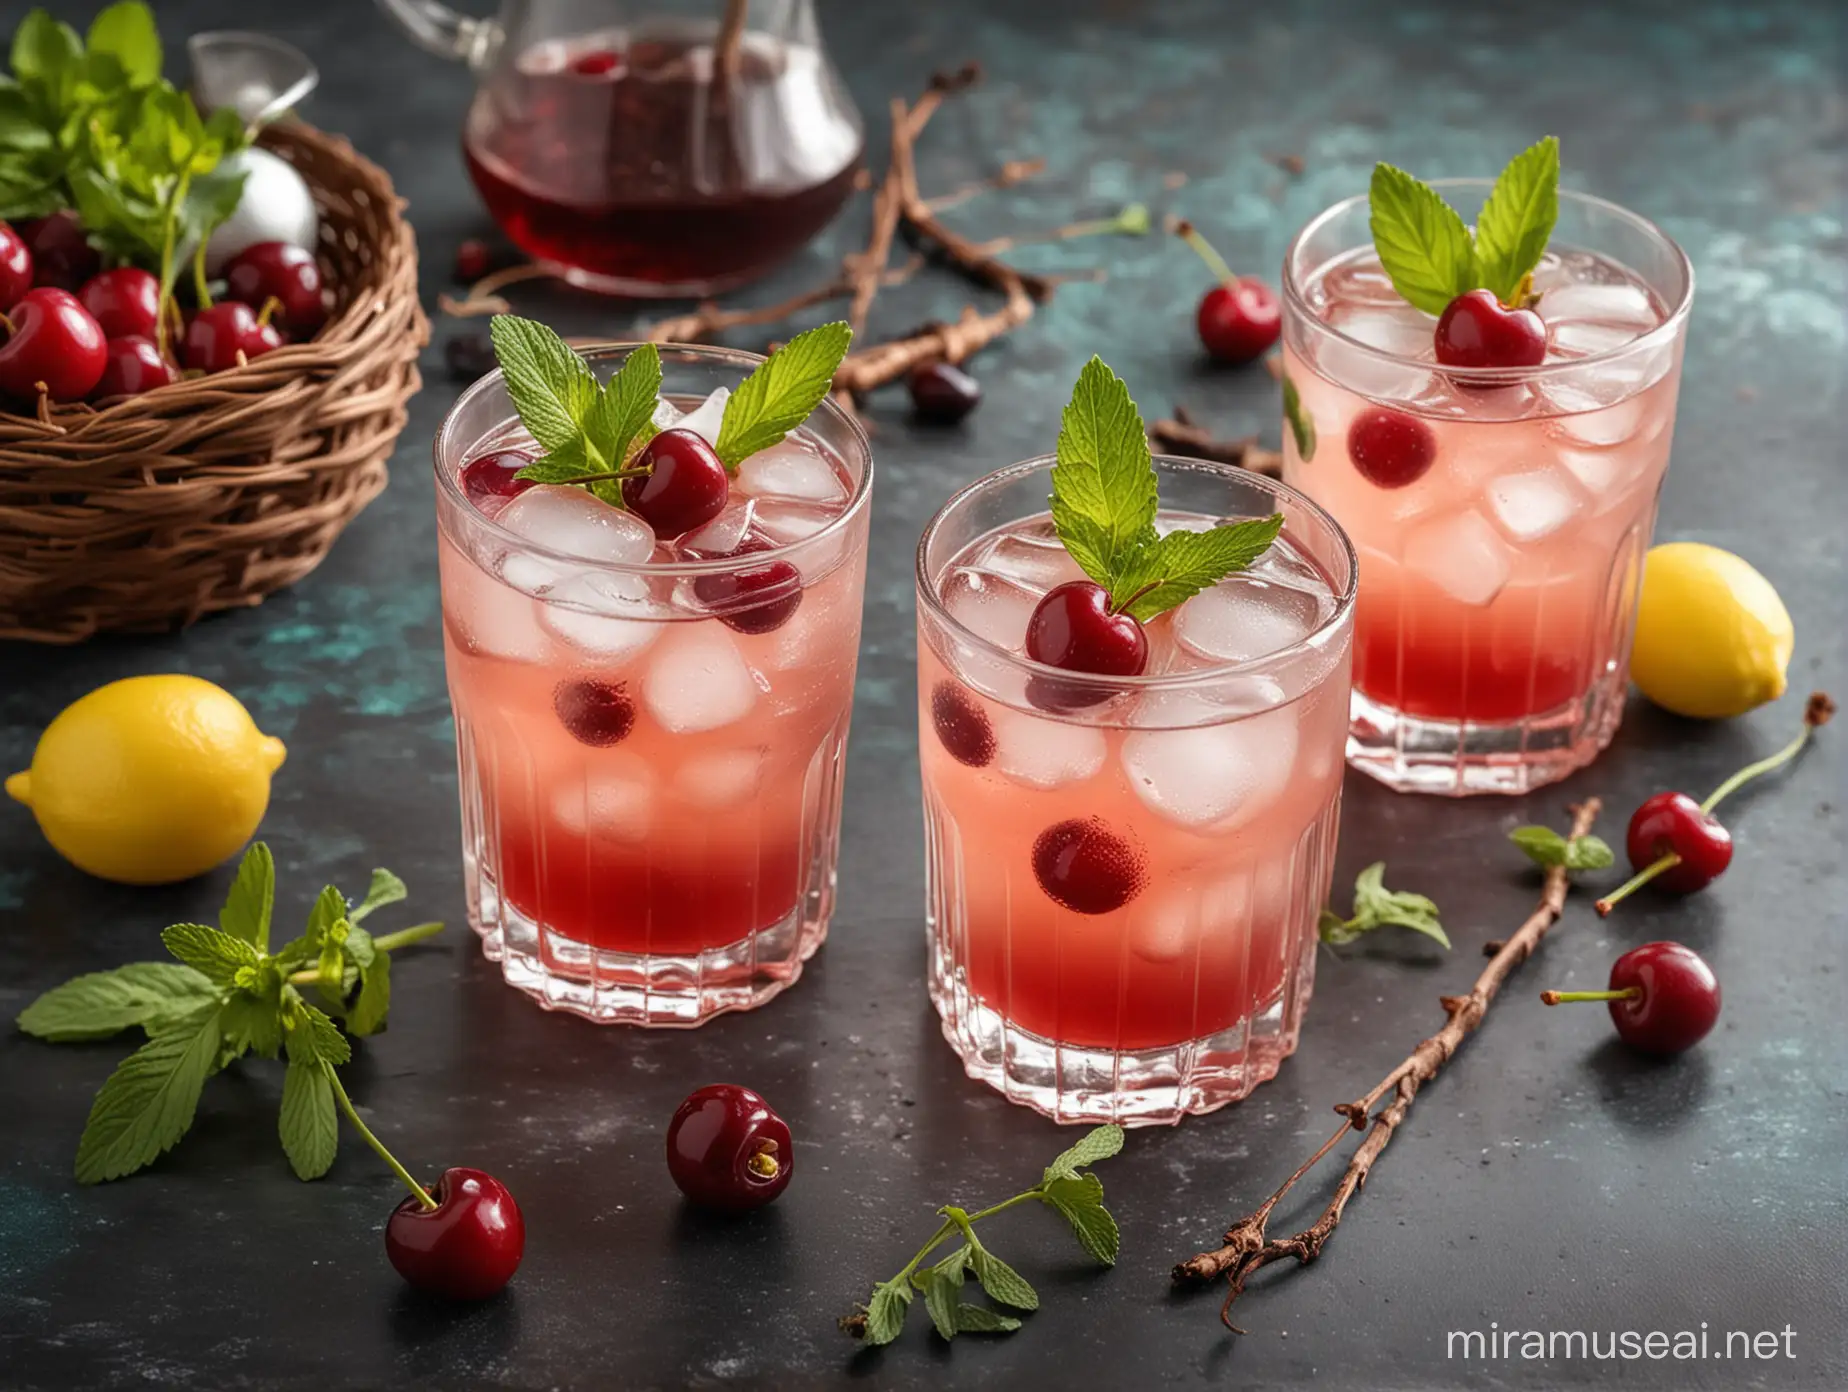 Elegant Easter Bourbon Cocktail with Cherry and Mint Garnish